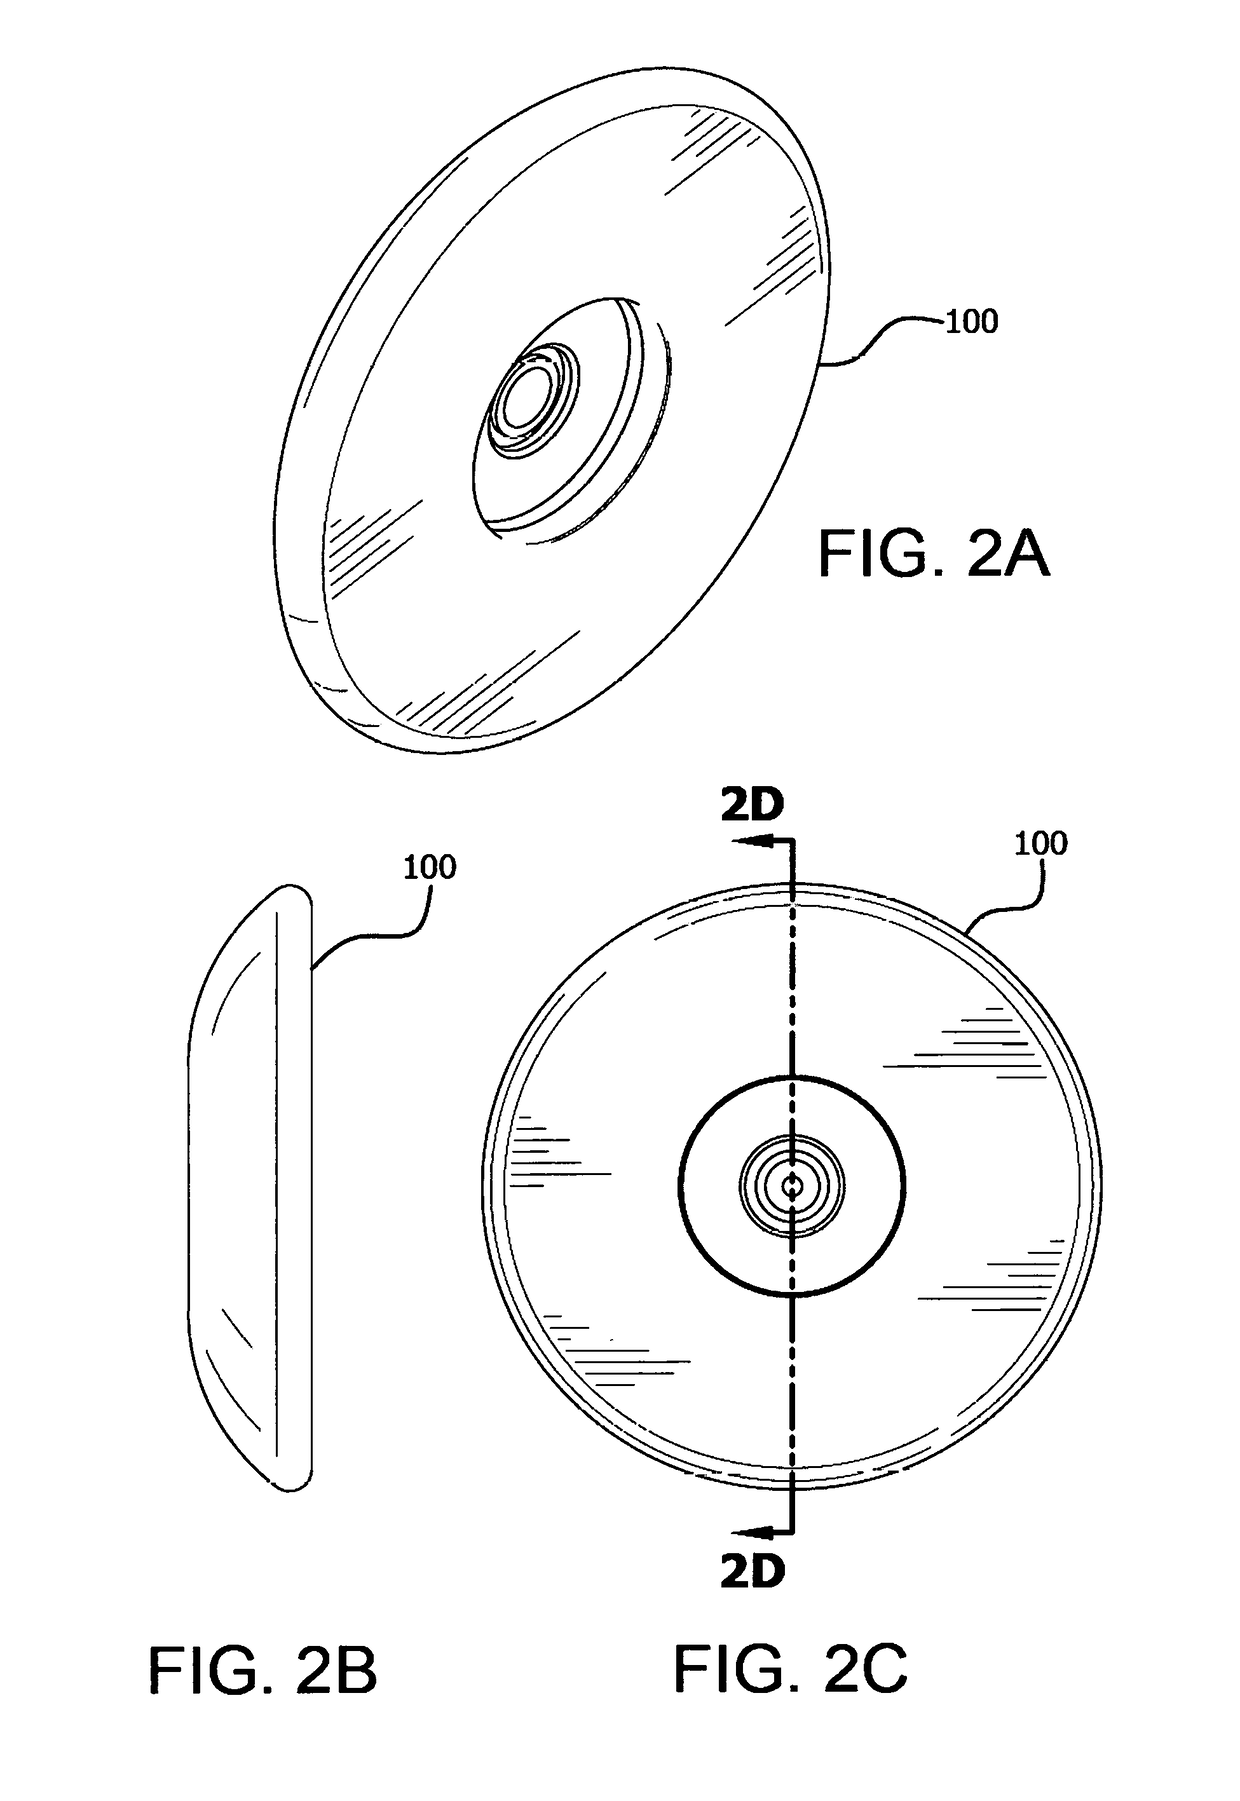 Yo-yo having a magnetically supported bearing yoke integrated with the axle